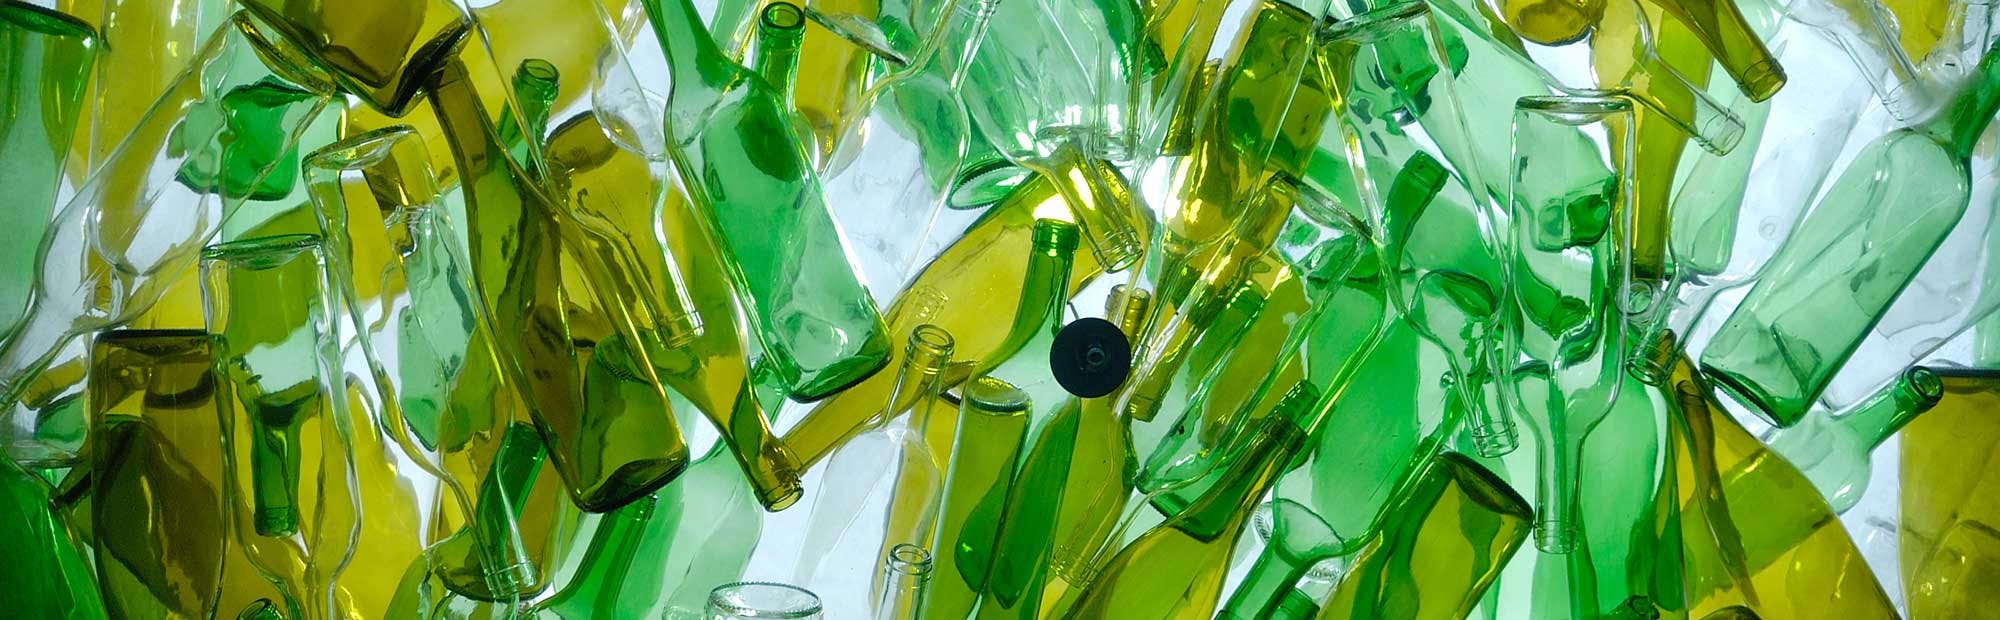 Collection of green and brown glass bottles